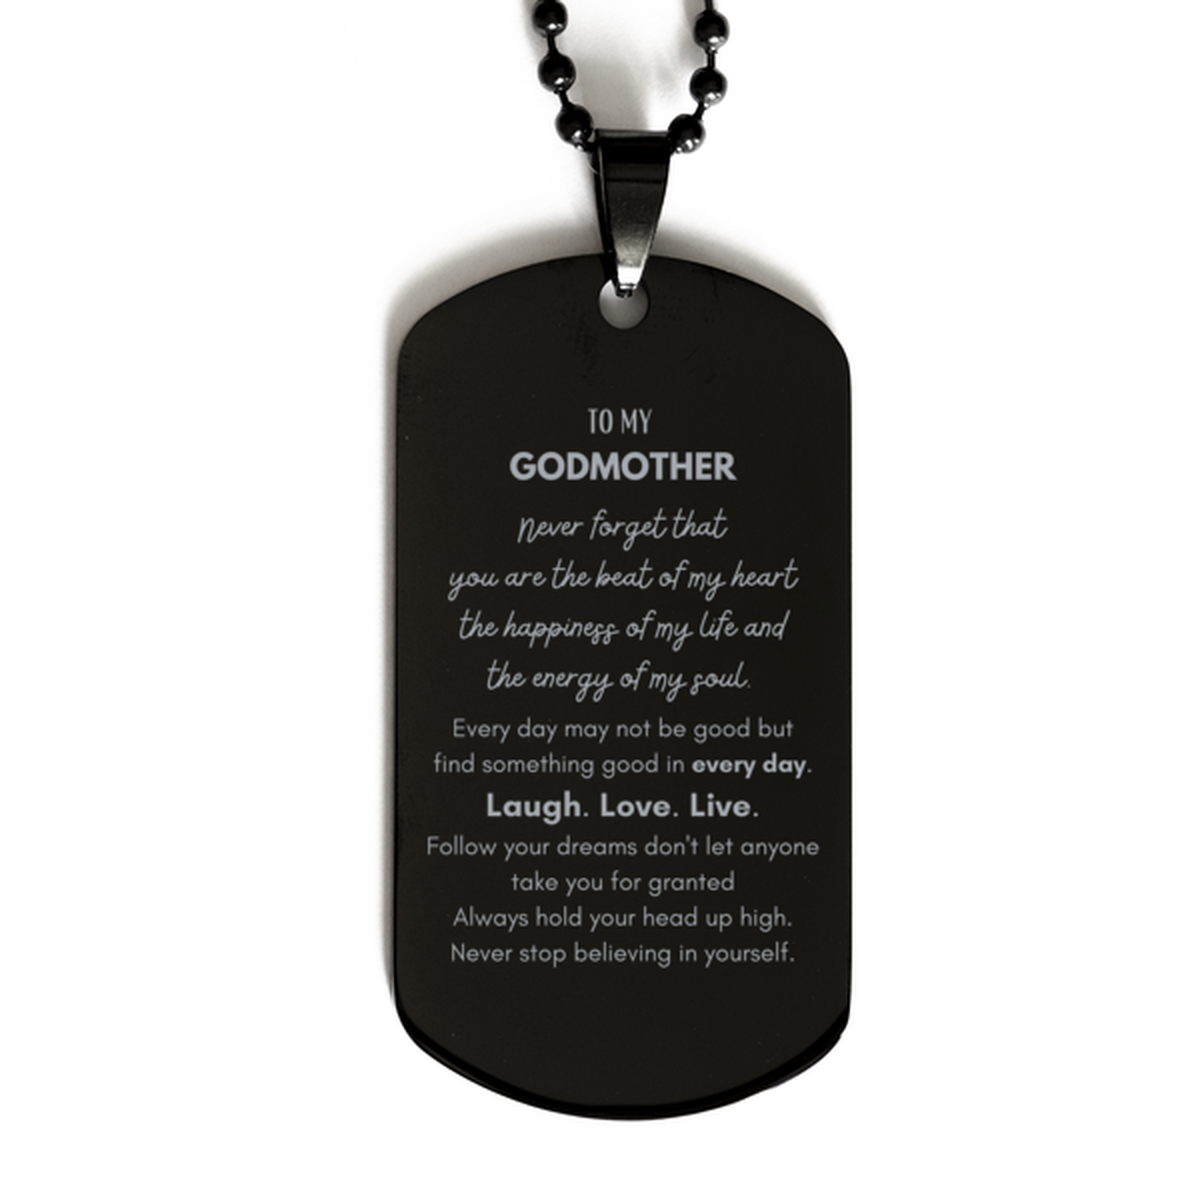 To My Godmother Dogtag Gifts, Christmas Godmother Black Dog Tag Present, Birthday Unique Motivational For Godmother, To My Godmother Never forget that you are the beat of my heart the happiness of my life and the energy of my soul